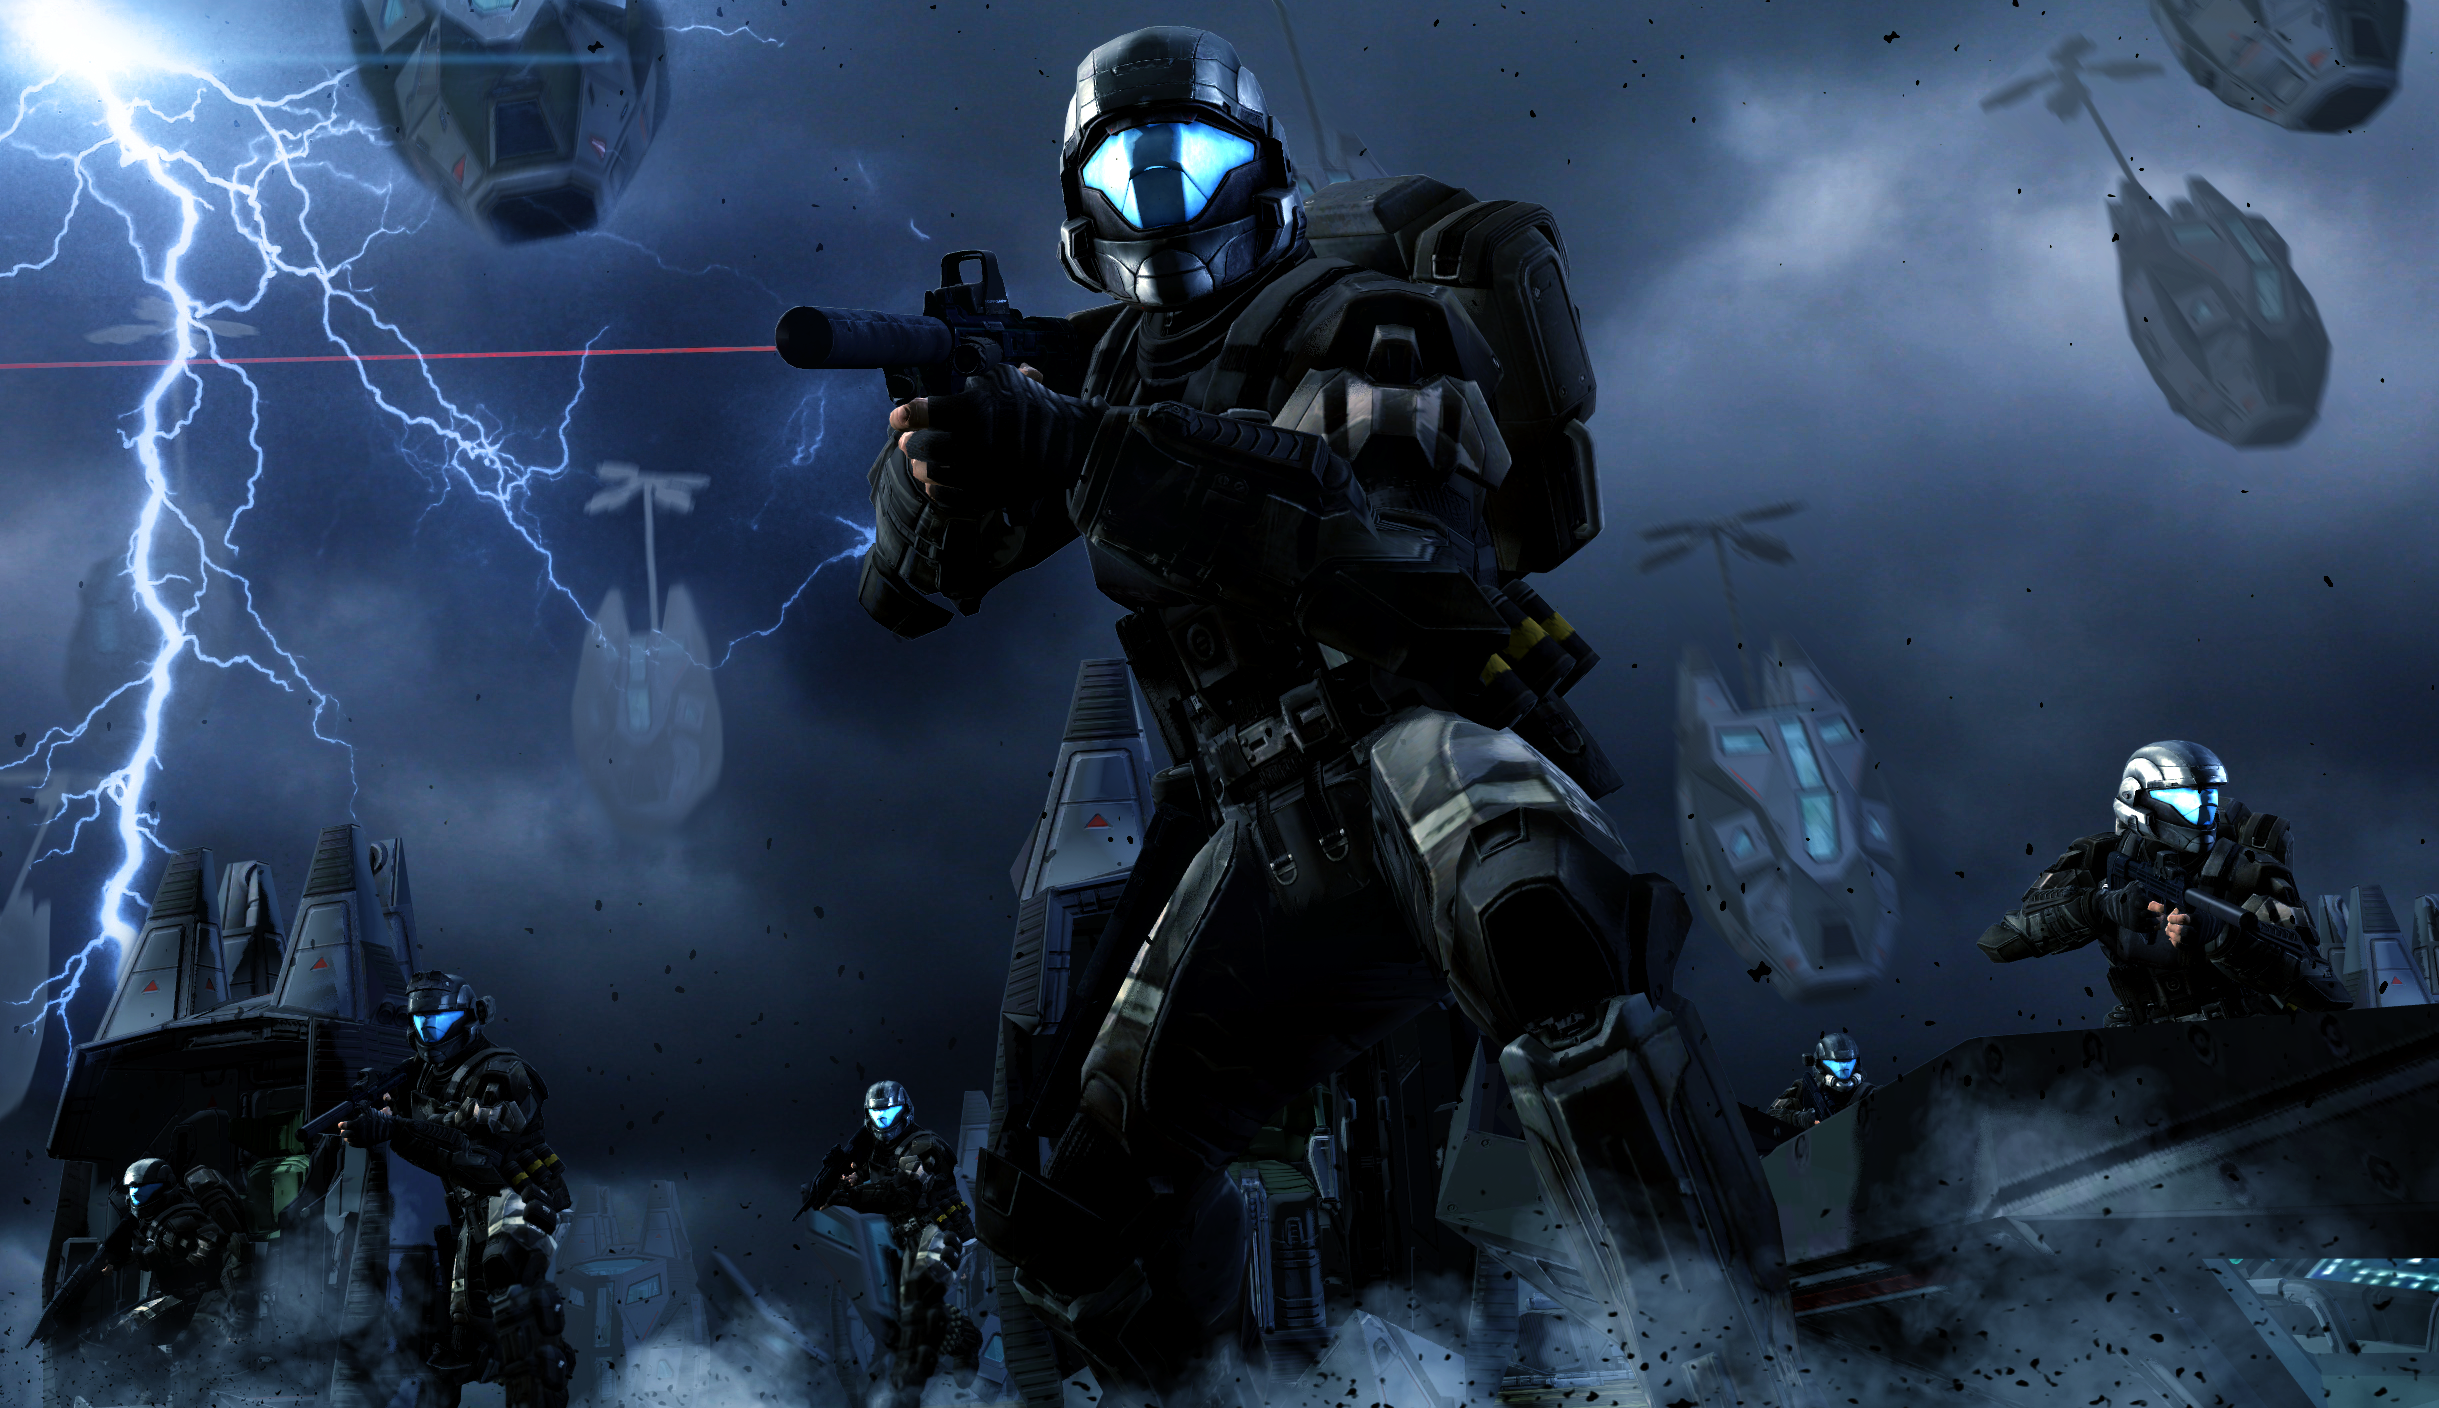 Odst Drop By Lordhayabusa357